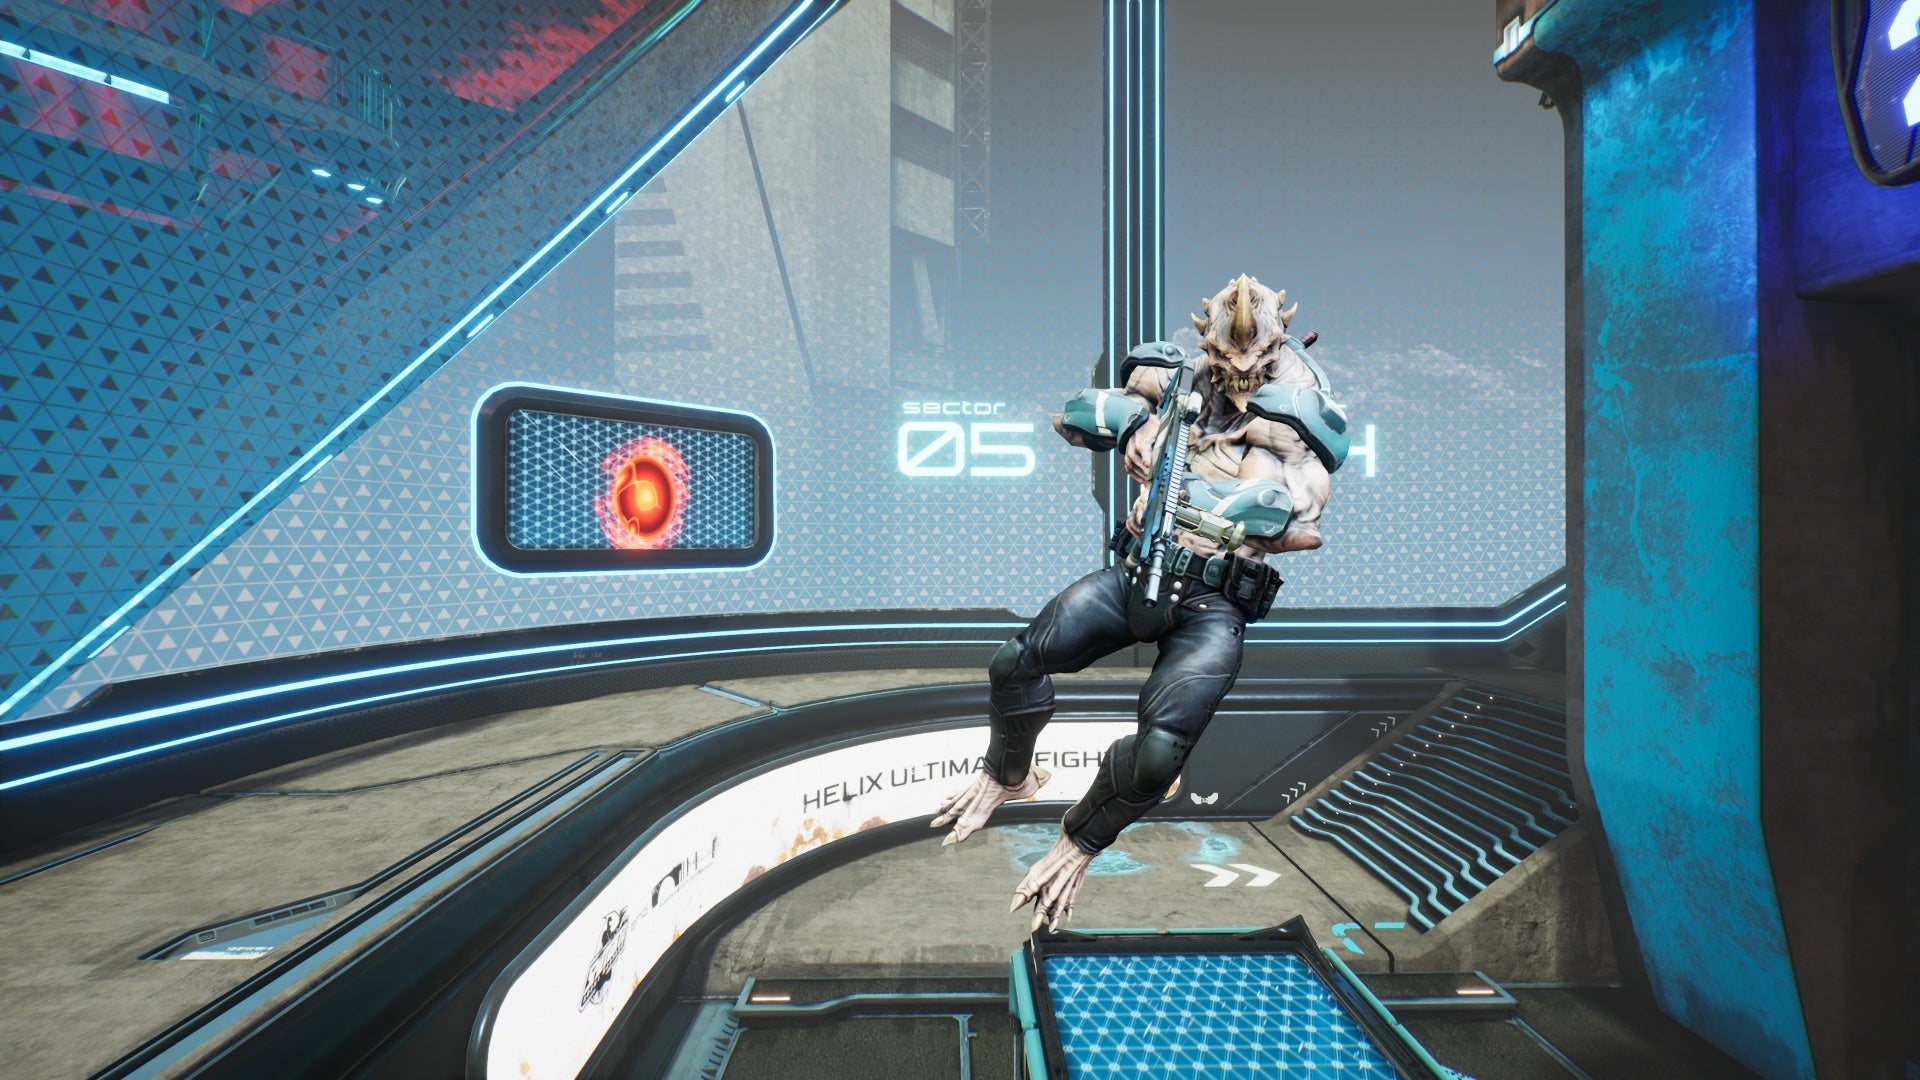 A screenshot of Splitgate season 0 showing a gnarly-looking monster with a machinegun in an arena environment.